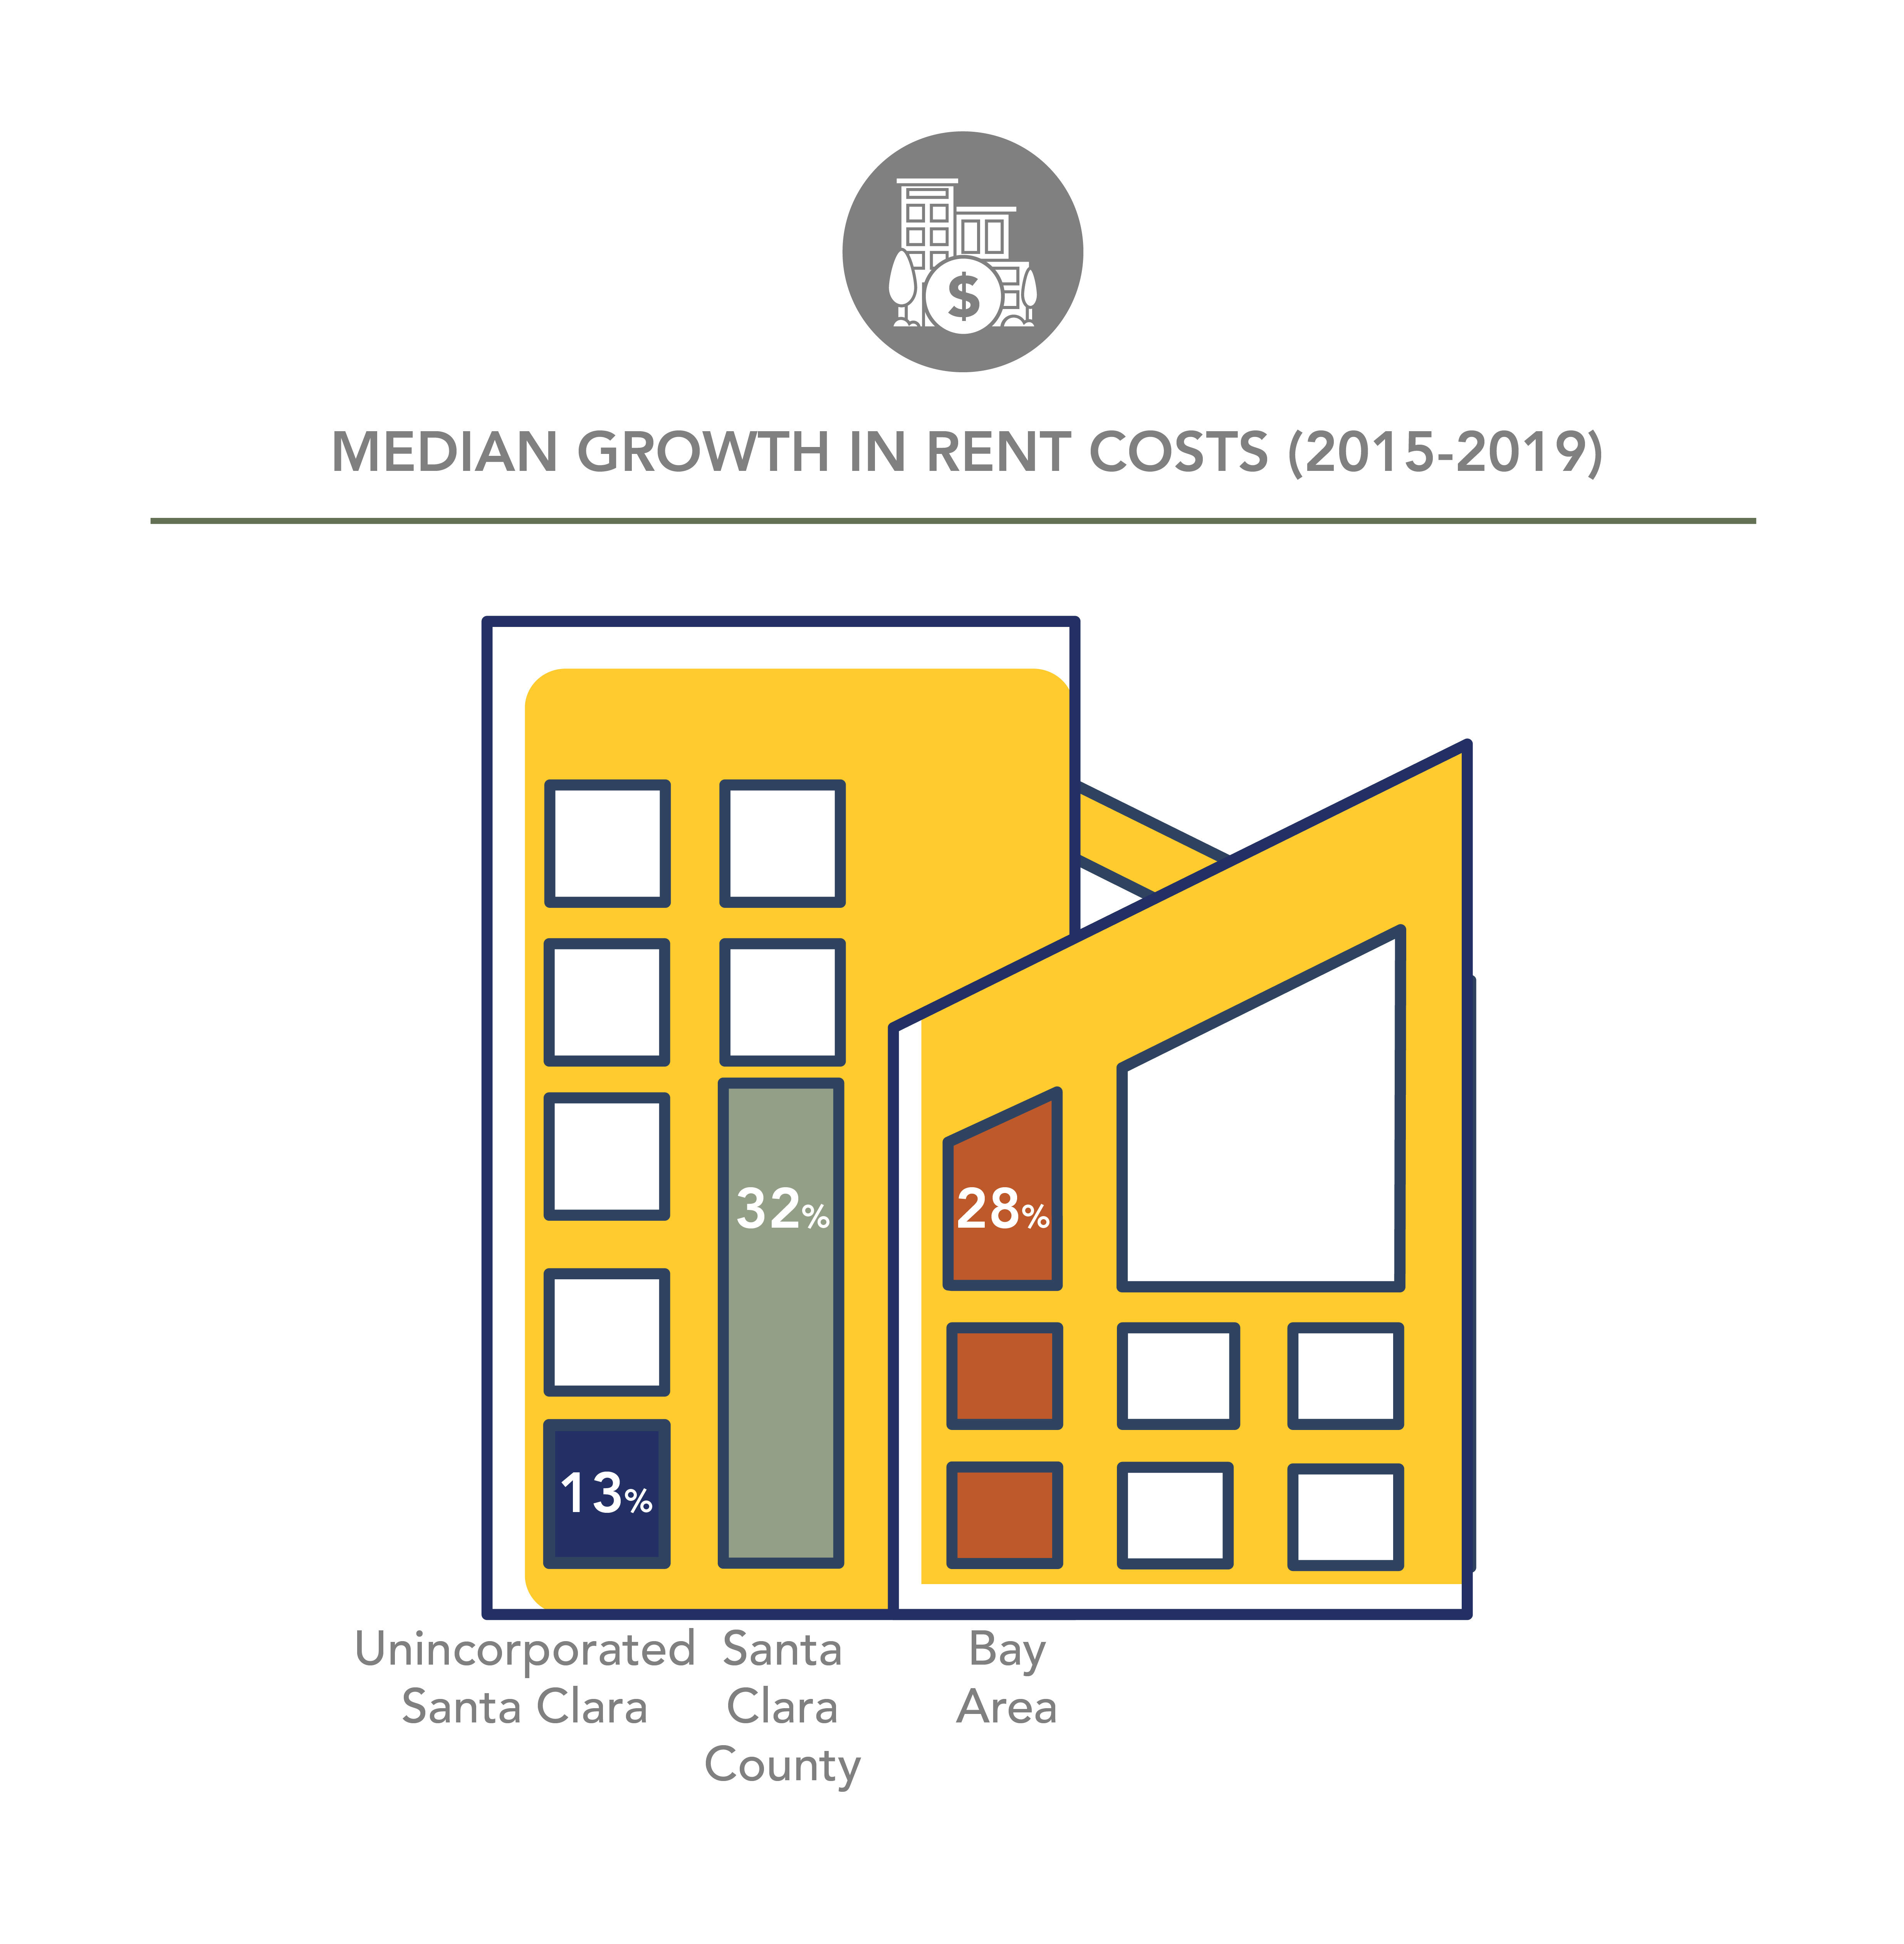 Rent costs have increased in Unincorporated Santa Clara by 13%, Santa Clara County by 32% and 28% in the Bay Area